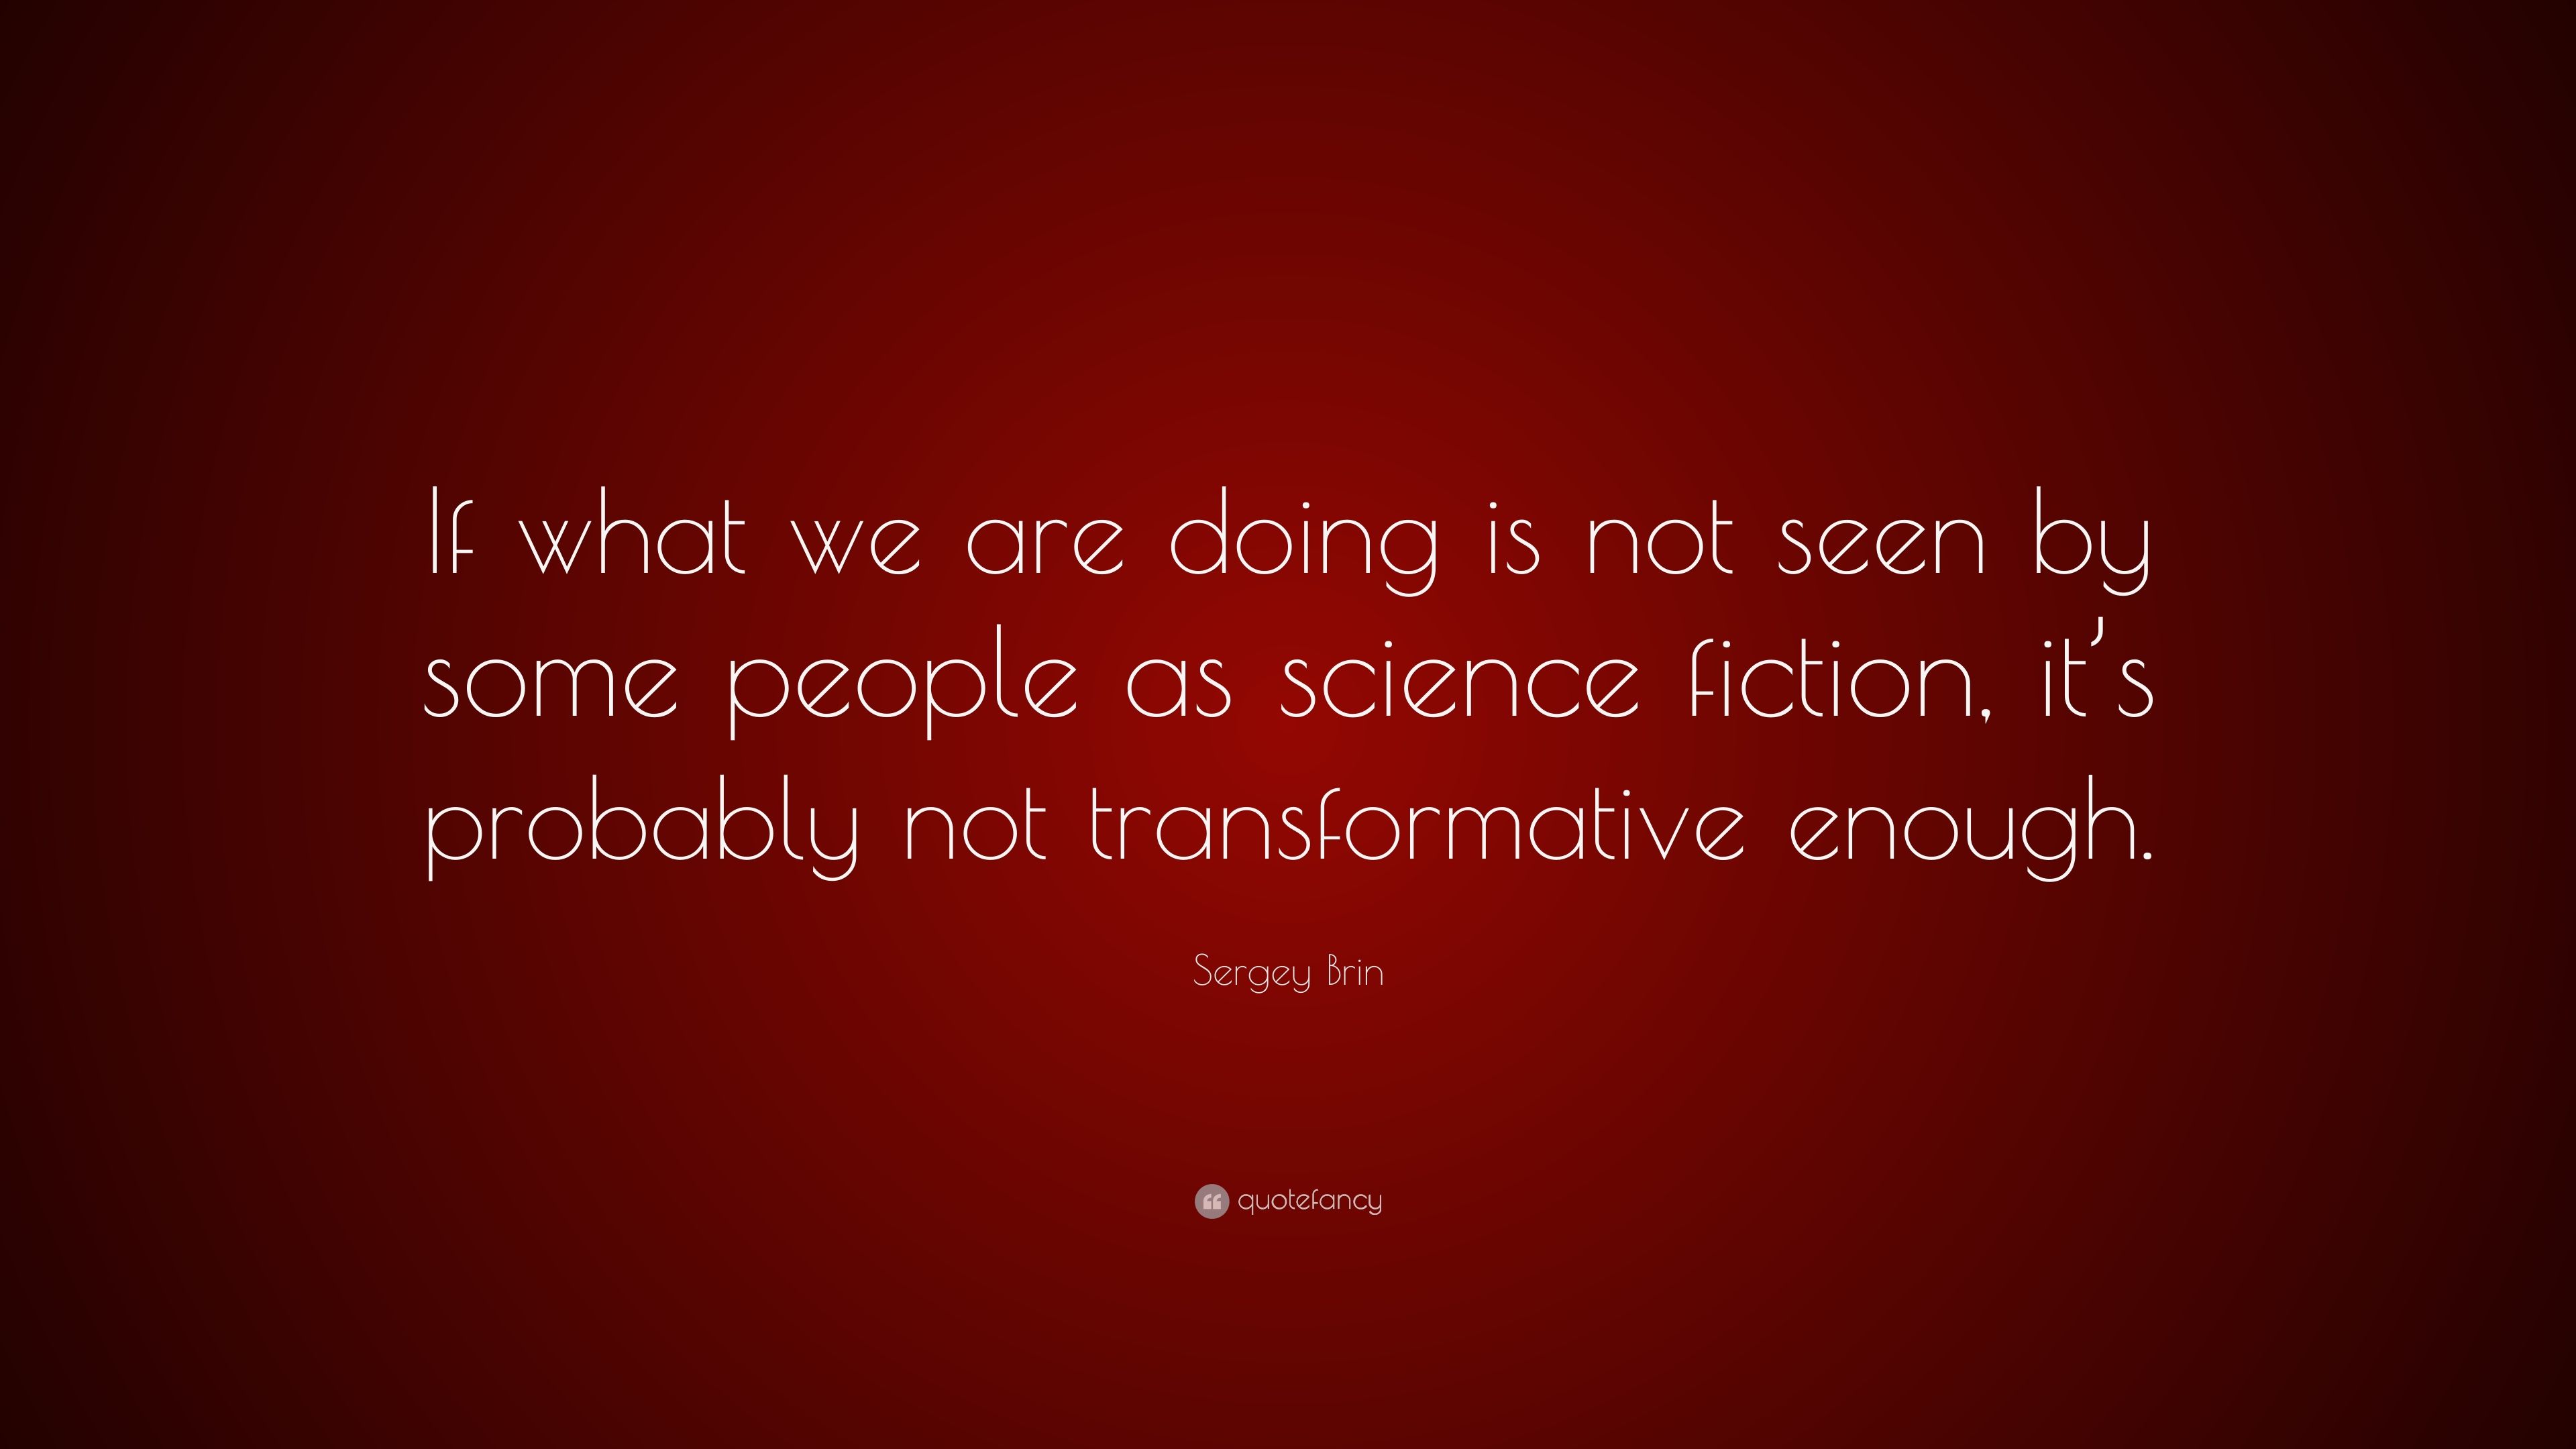 Sergey Brin Quote: “If what we are doing is not seen